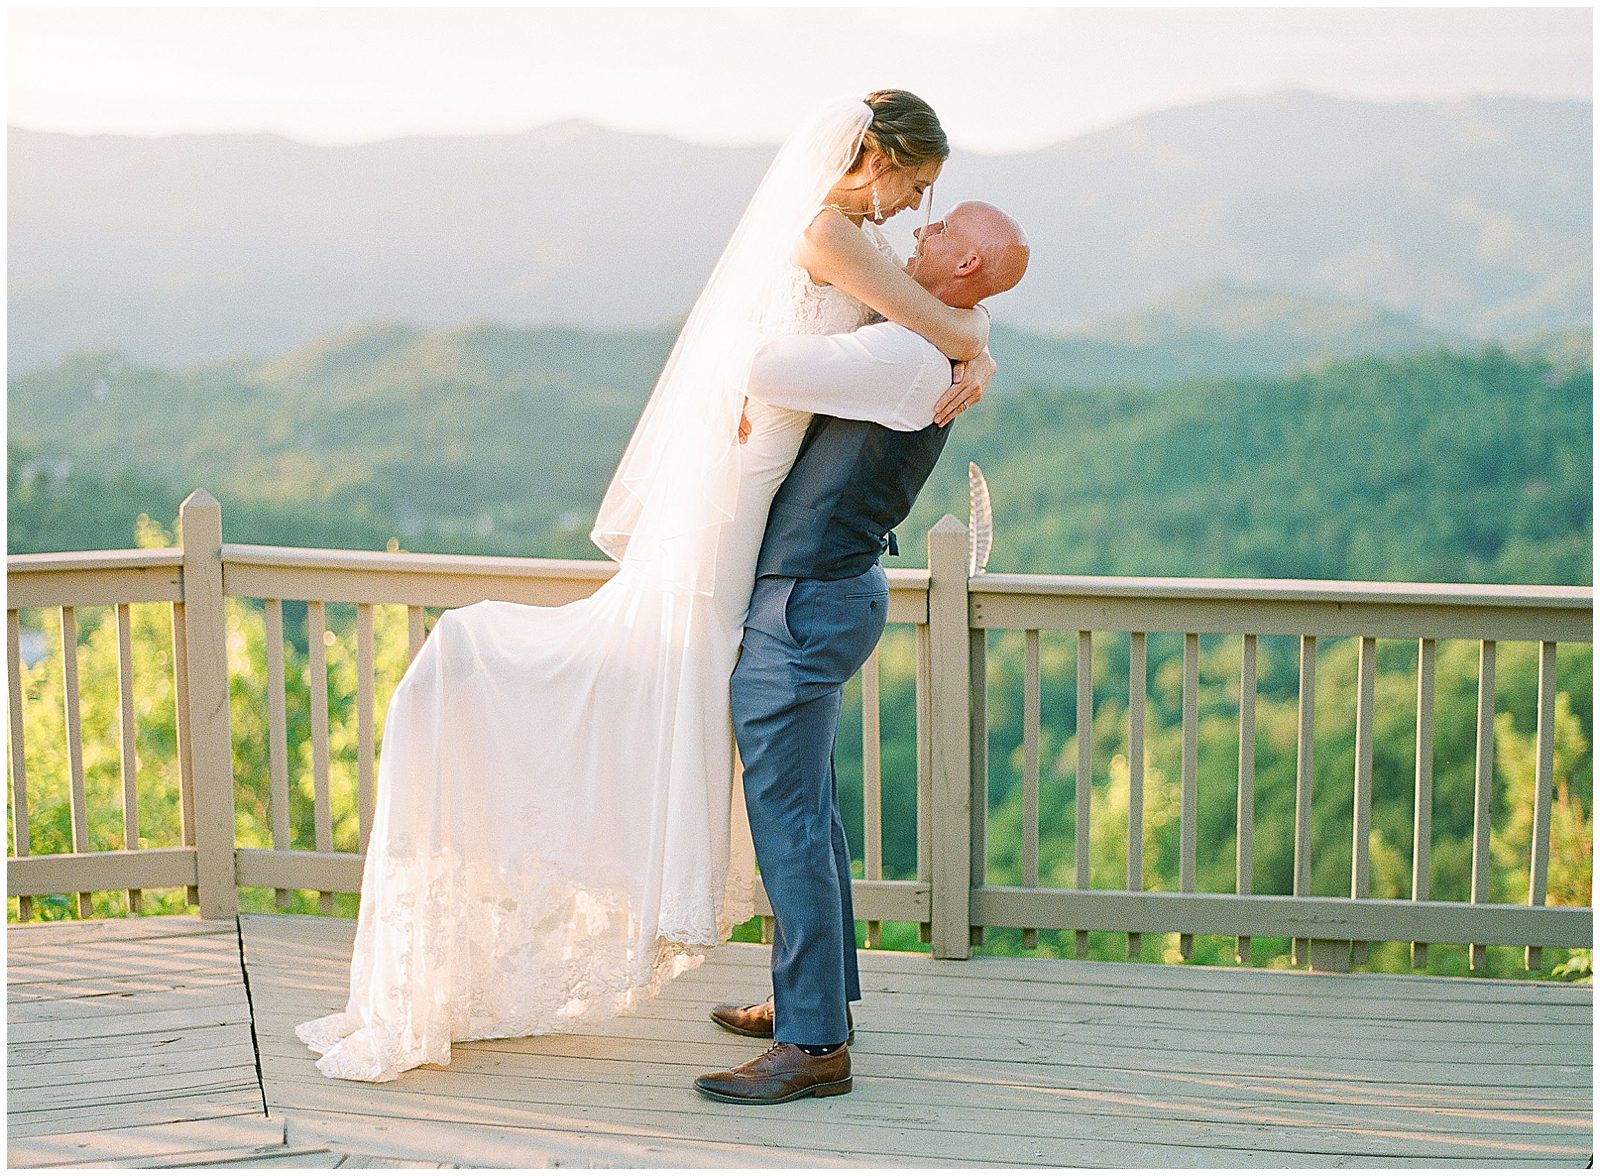 Groom Picking Bride Up With Mountains In Background Photo